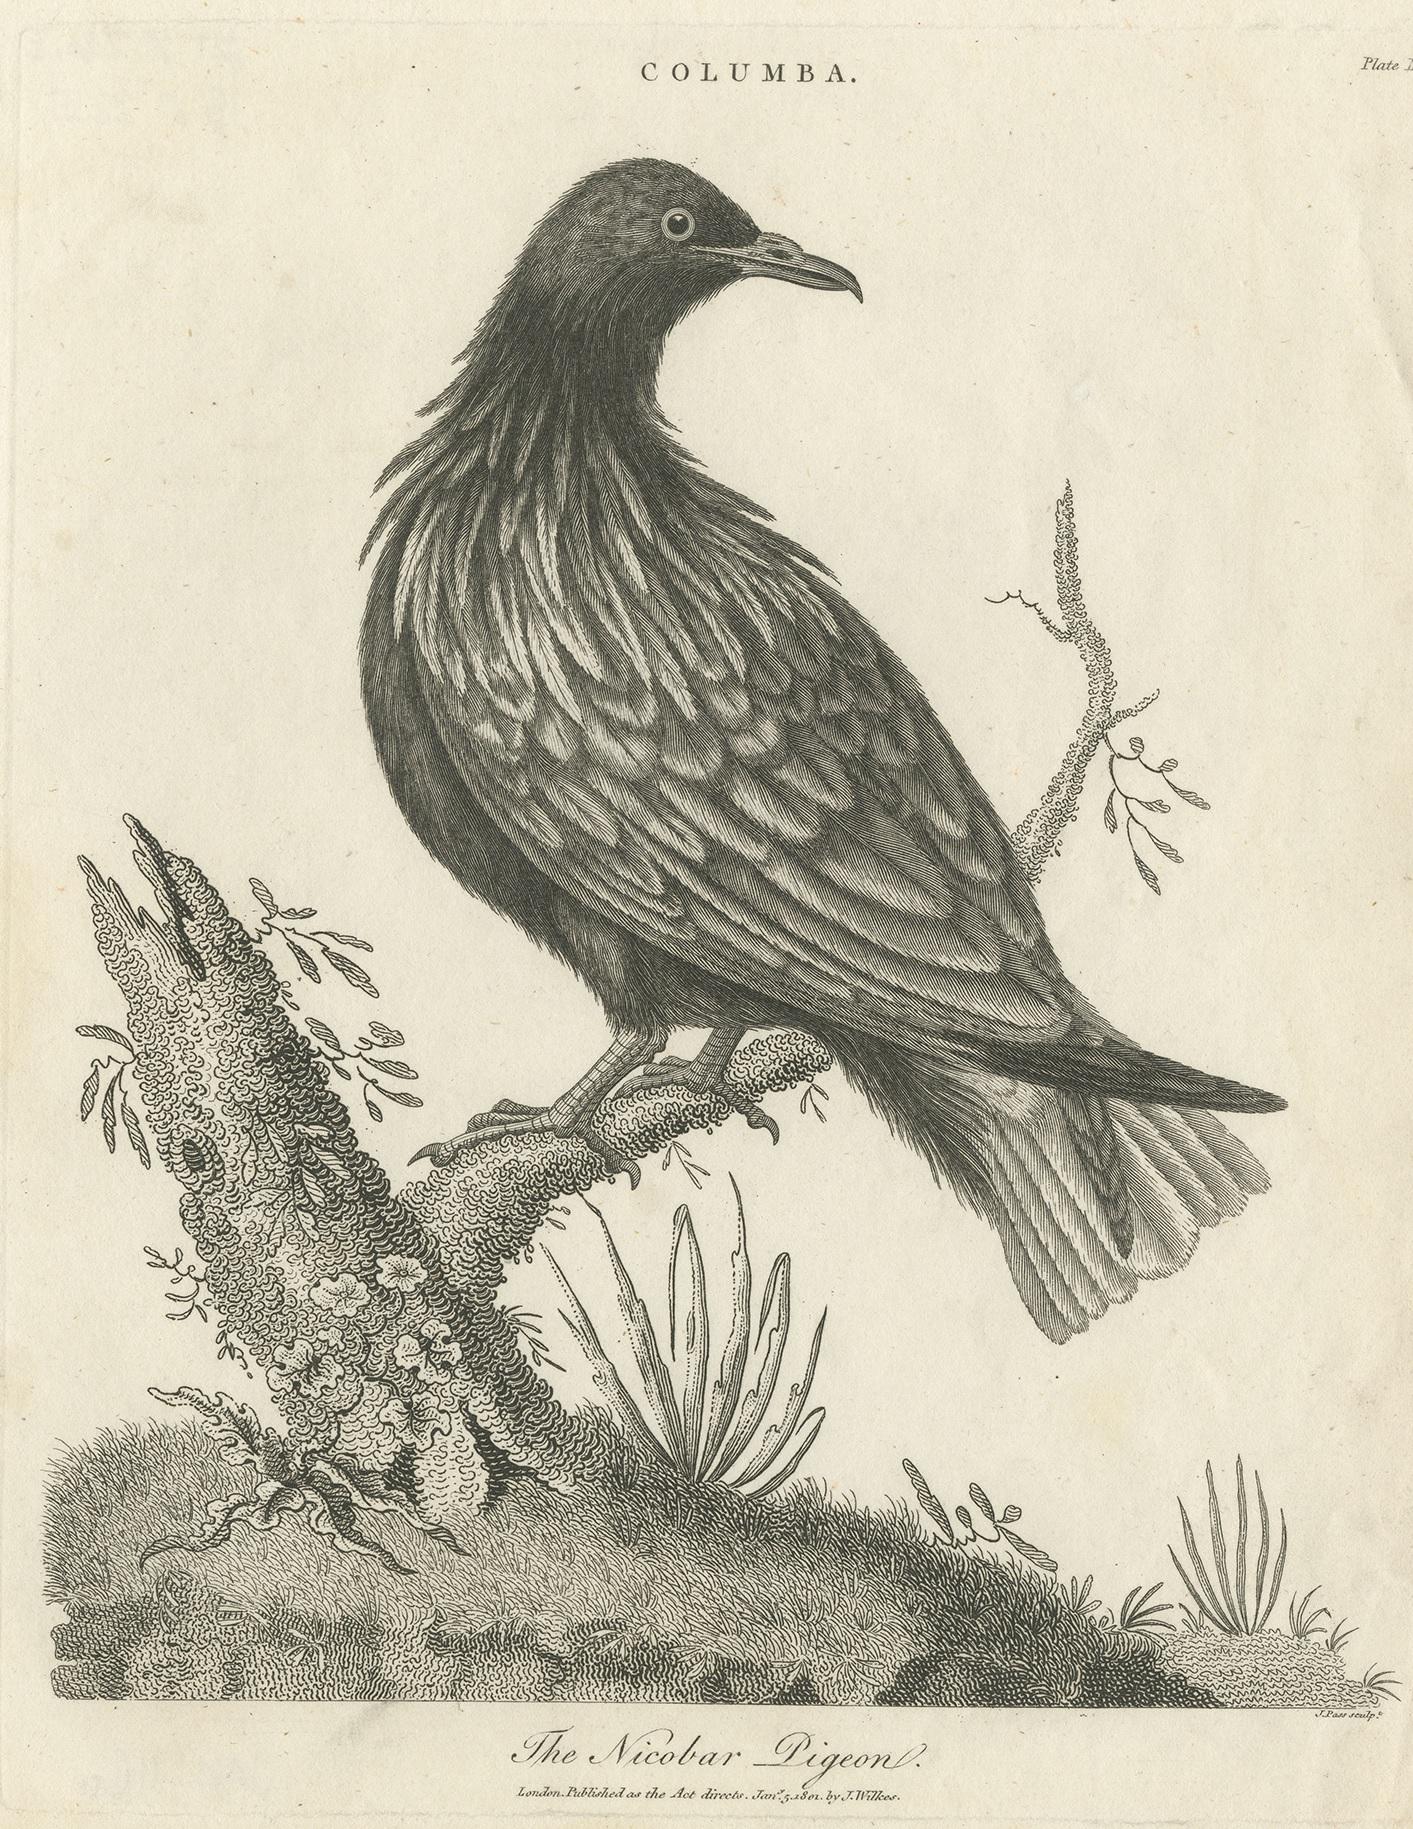 Antique bird print titled 'Columba - The Nicobar Pigeon'. Antique print of the Nicobar Pigeon. This print originates from 'Encyclopaedia Londinensis' published by J. Wilkes.